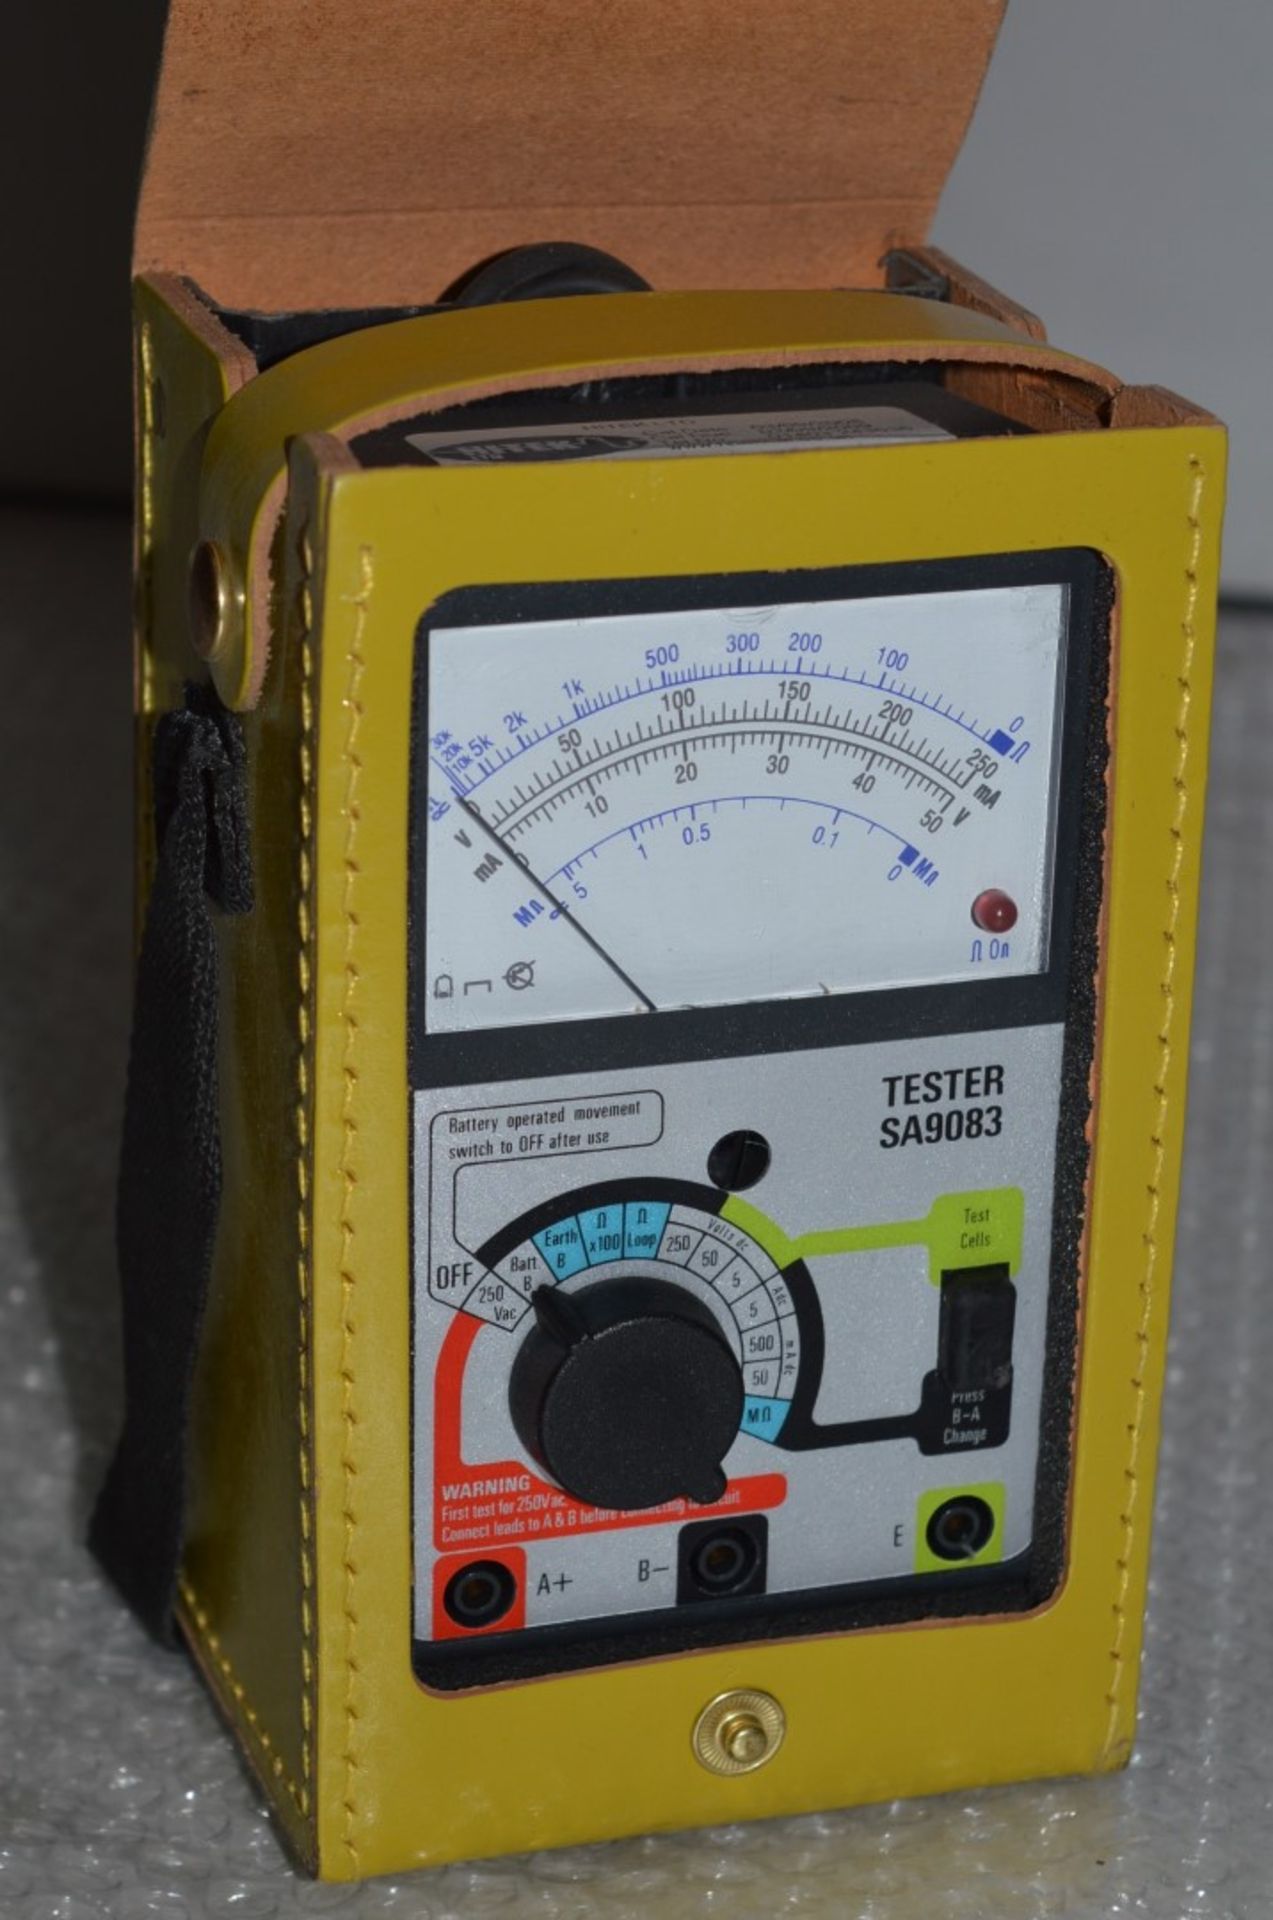 1 x Mills SA9083 Multimeter - Suitable For Telephone Engineers in Maintenance Testing - With Carry - Image 3 of 8